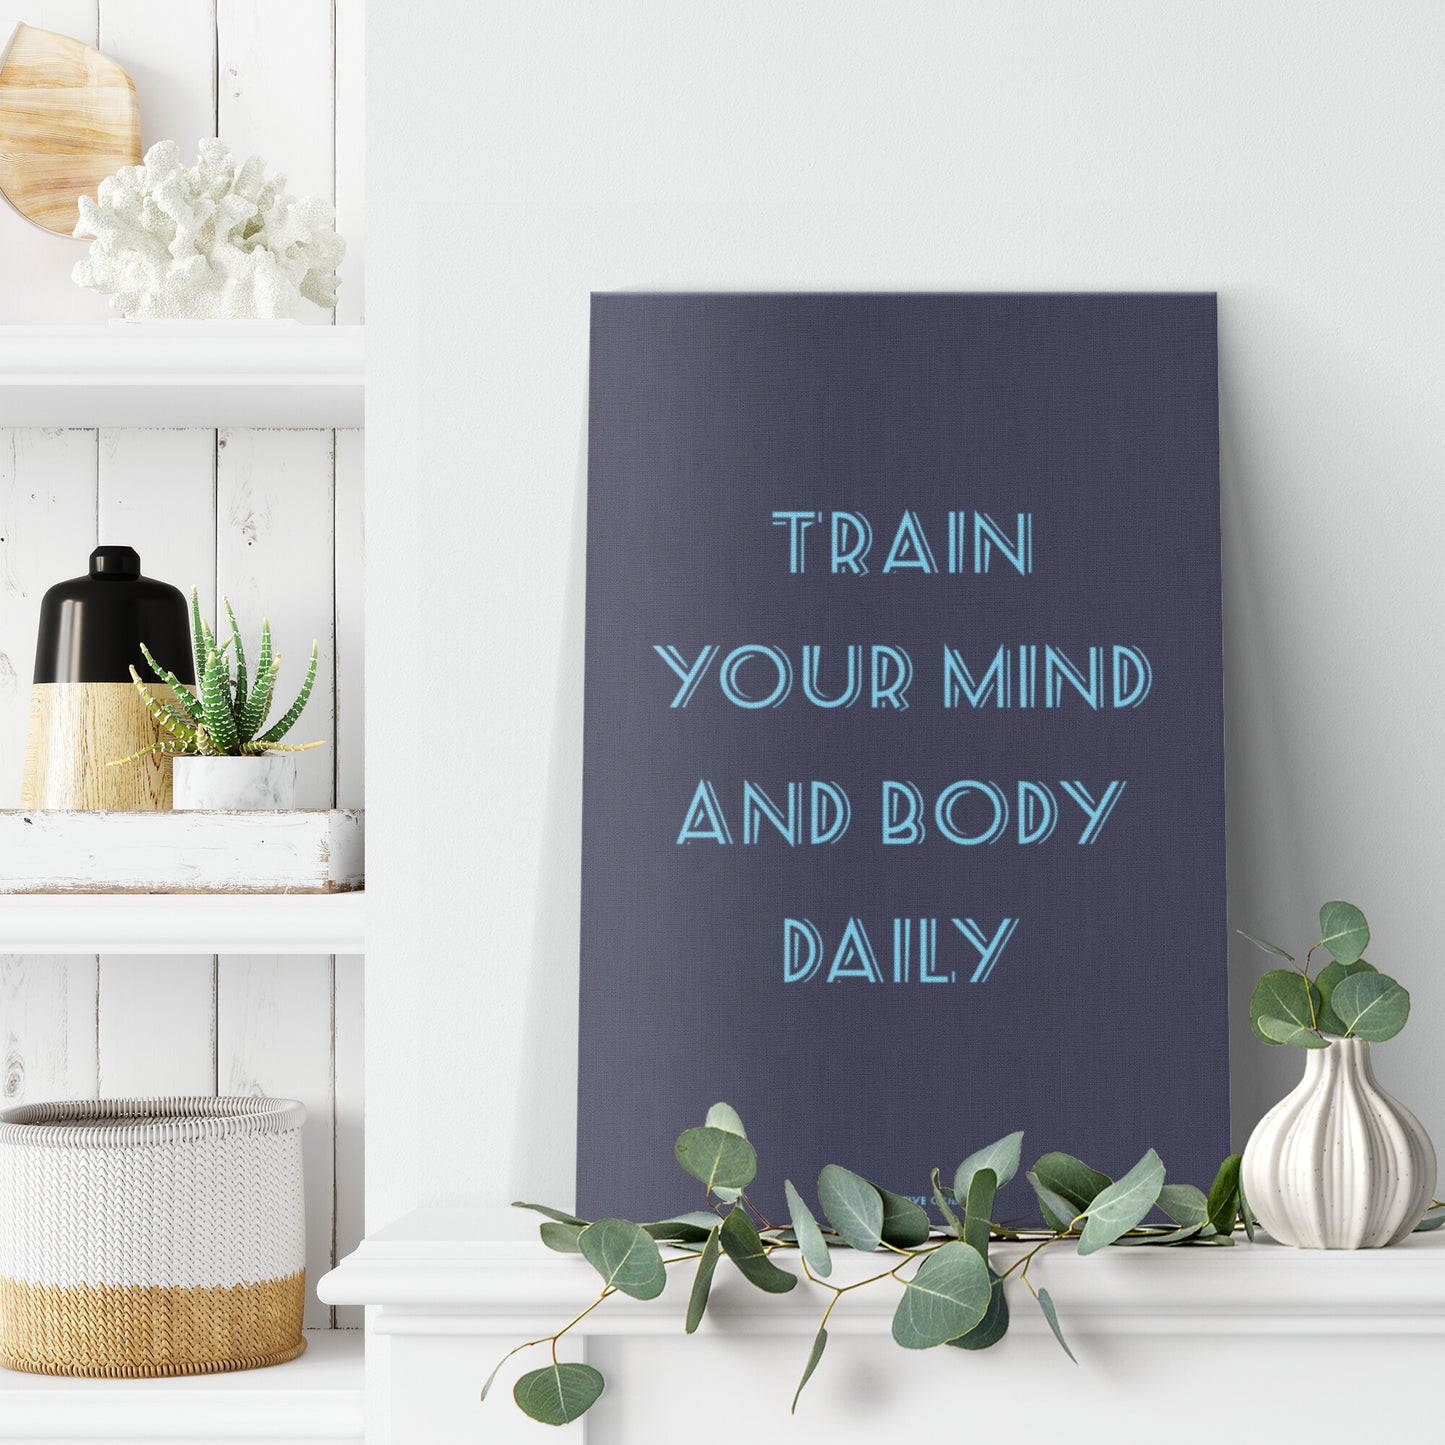 TRAIN YOUR MIND AND BODY DAILY